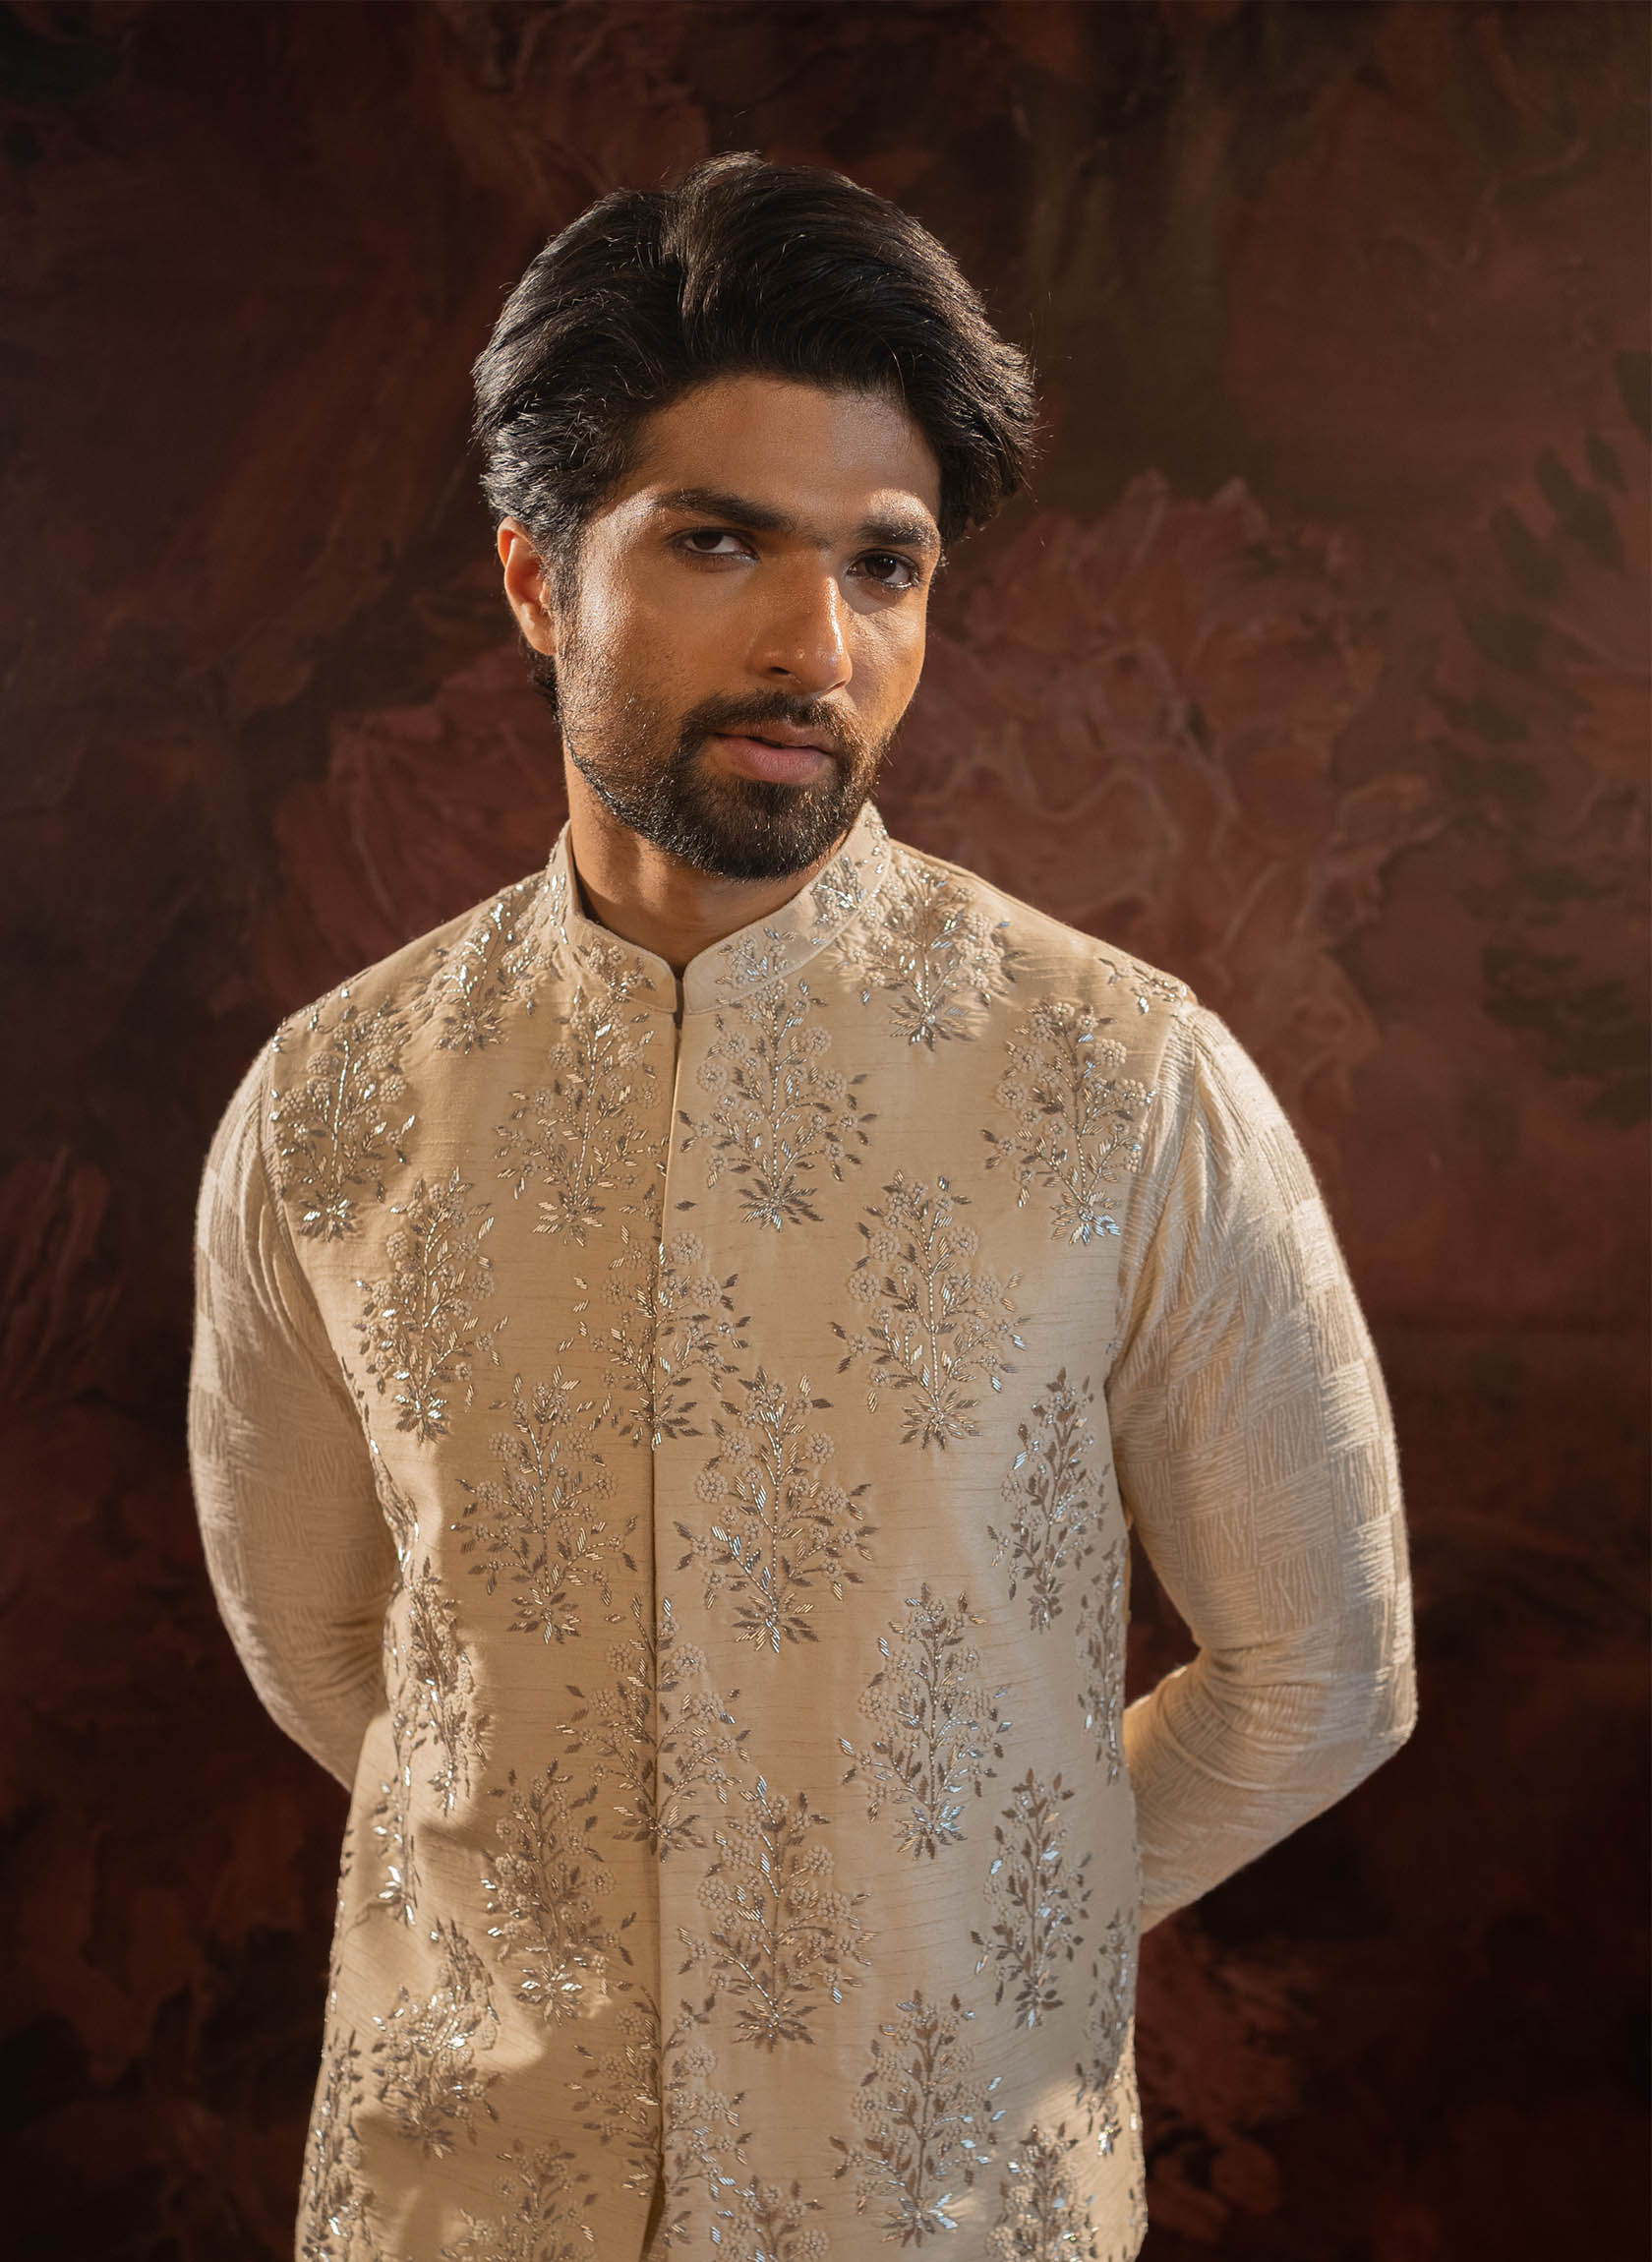 Ivory silk jacket with floral motifs in silver zari. Comes as a set with Offwhite Kurta set with all over abstract embroidery in tone on tone hues and churidar.